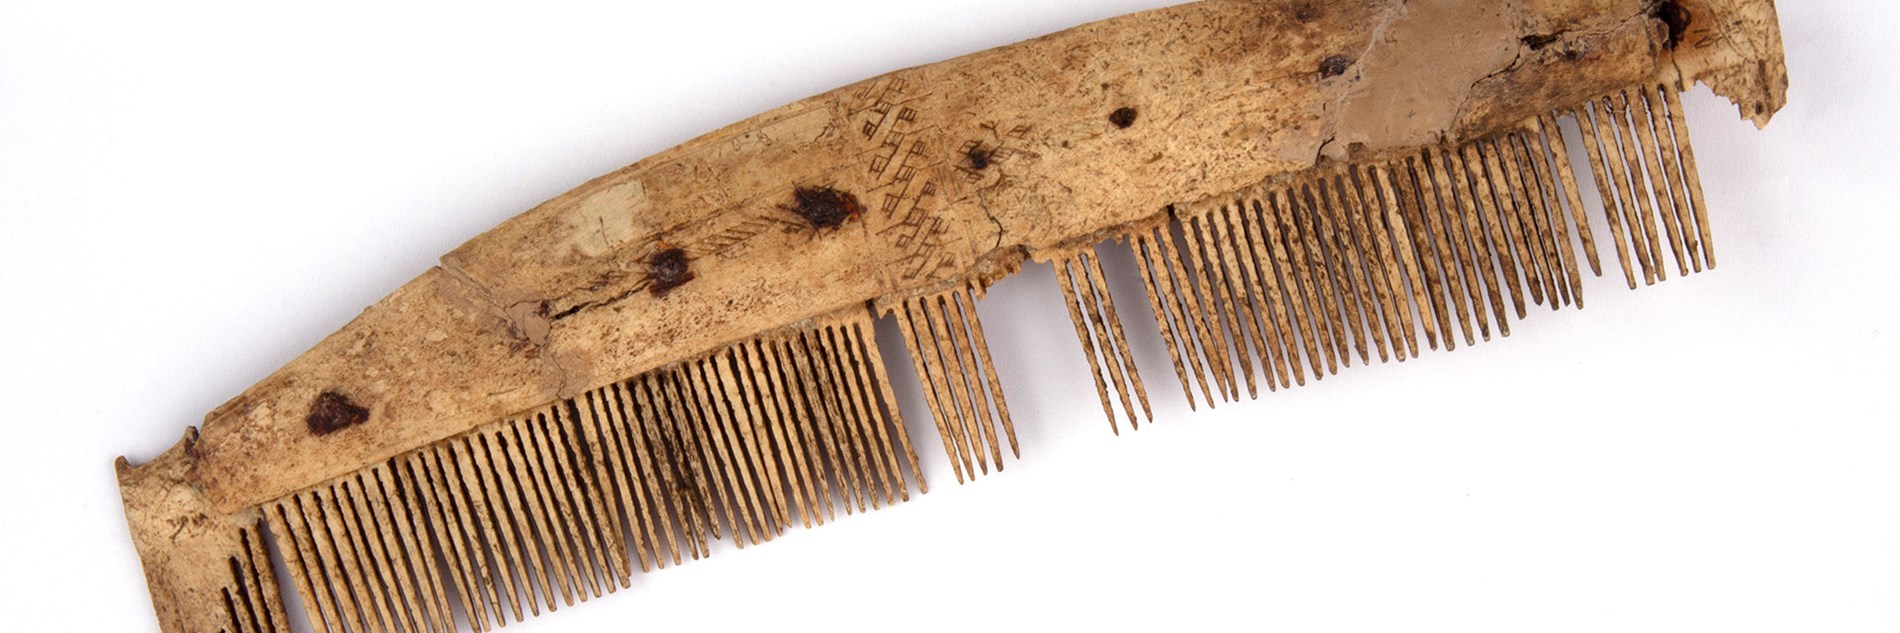 Remains of a light brown fine-toothed comb with decorative carving and some teeth missing.